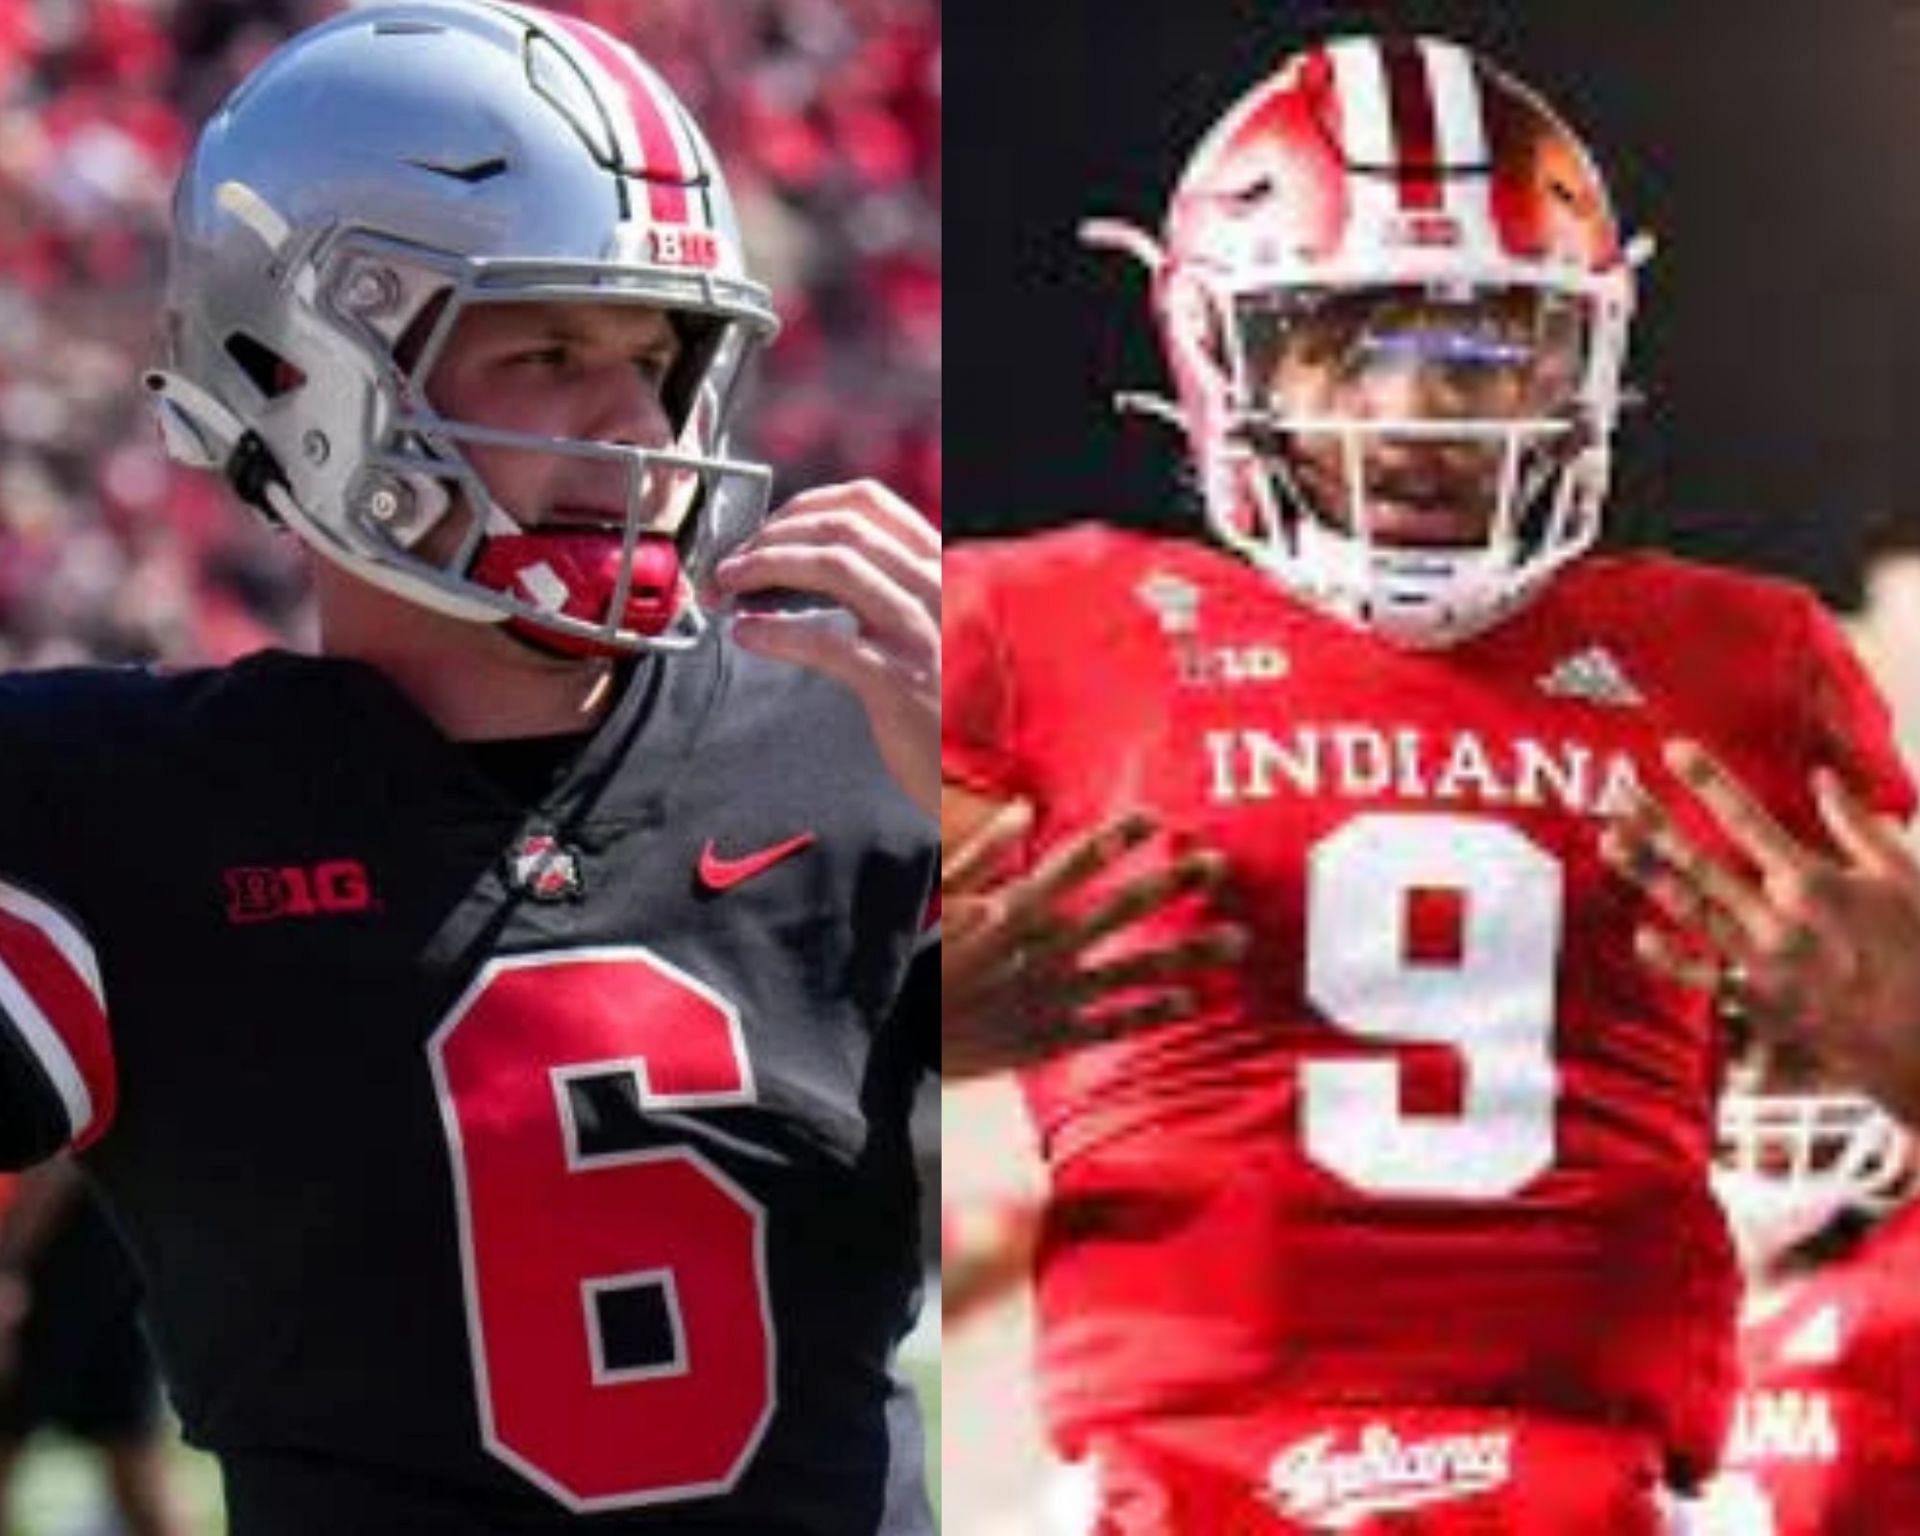 2021 Ohio State football schedule: Dates, times, TV channels, results